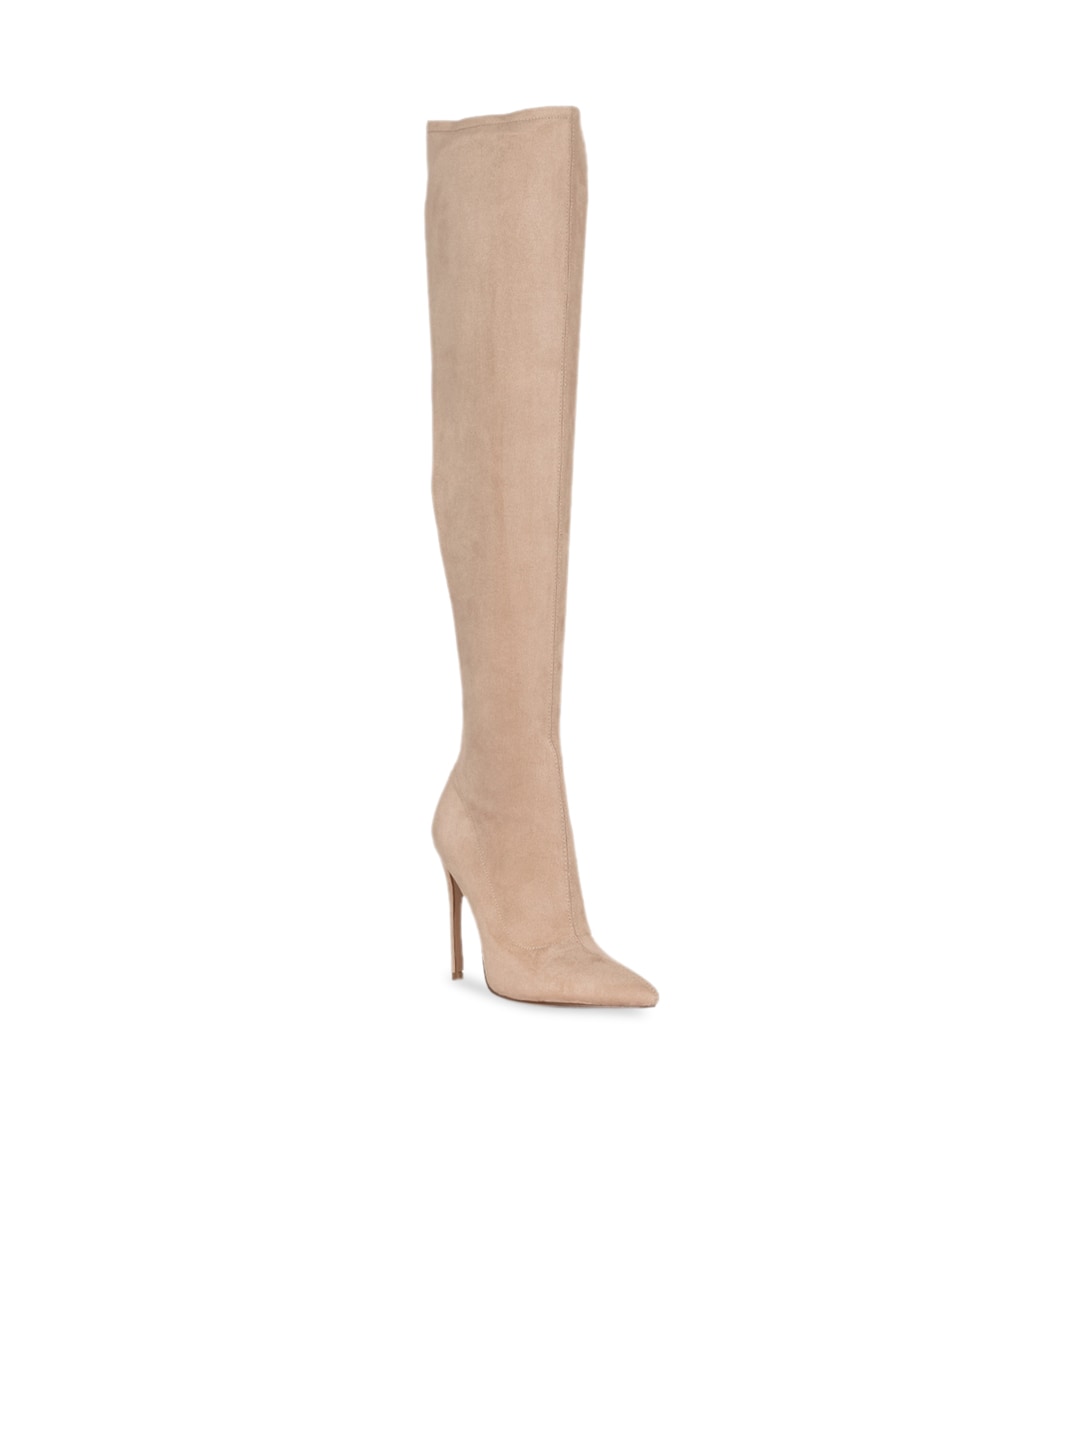 London Rag Beige Suede Party High-Top Stiletto Heeled Boots Price in India